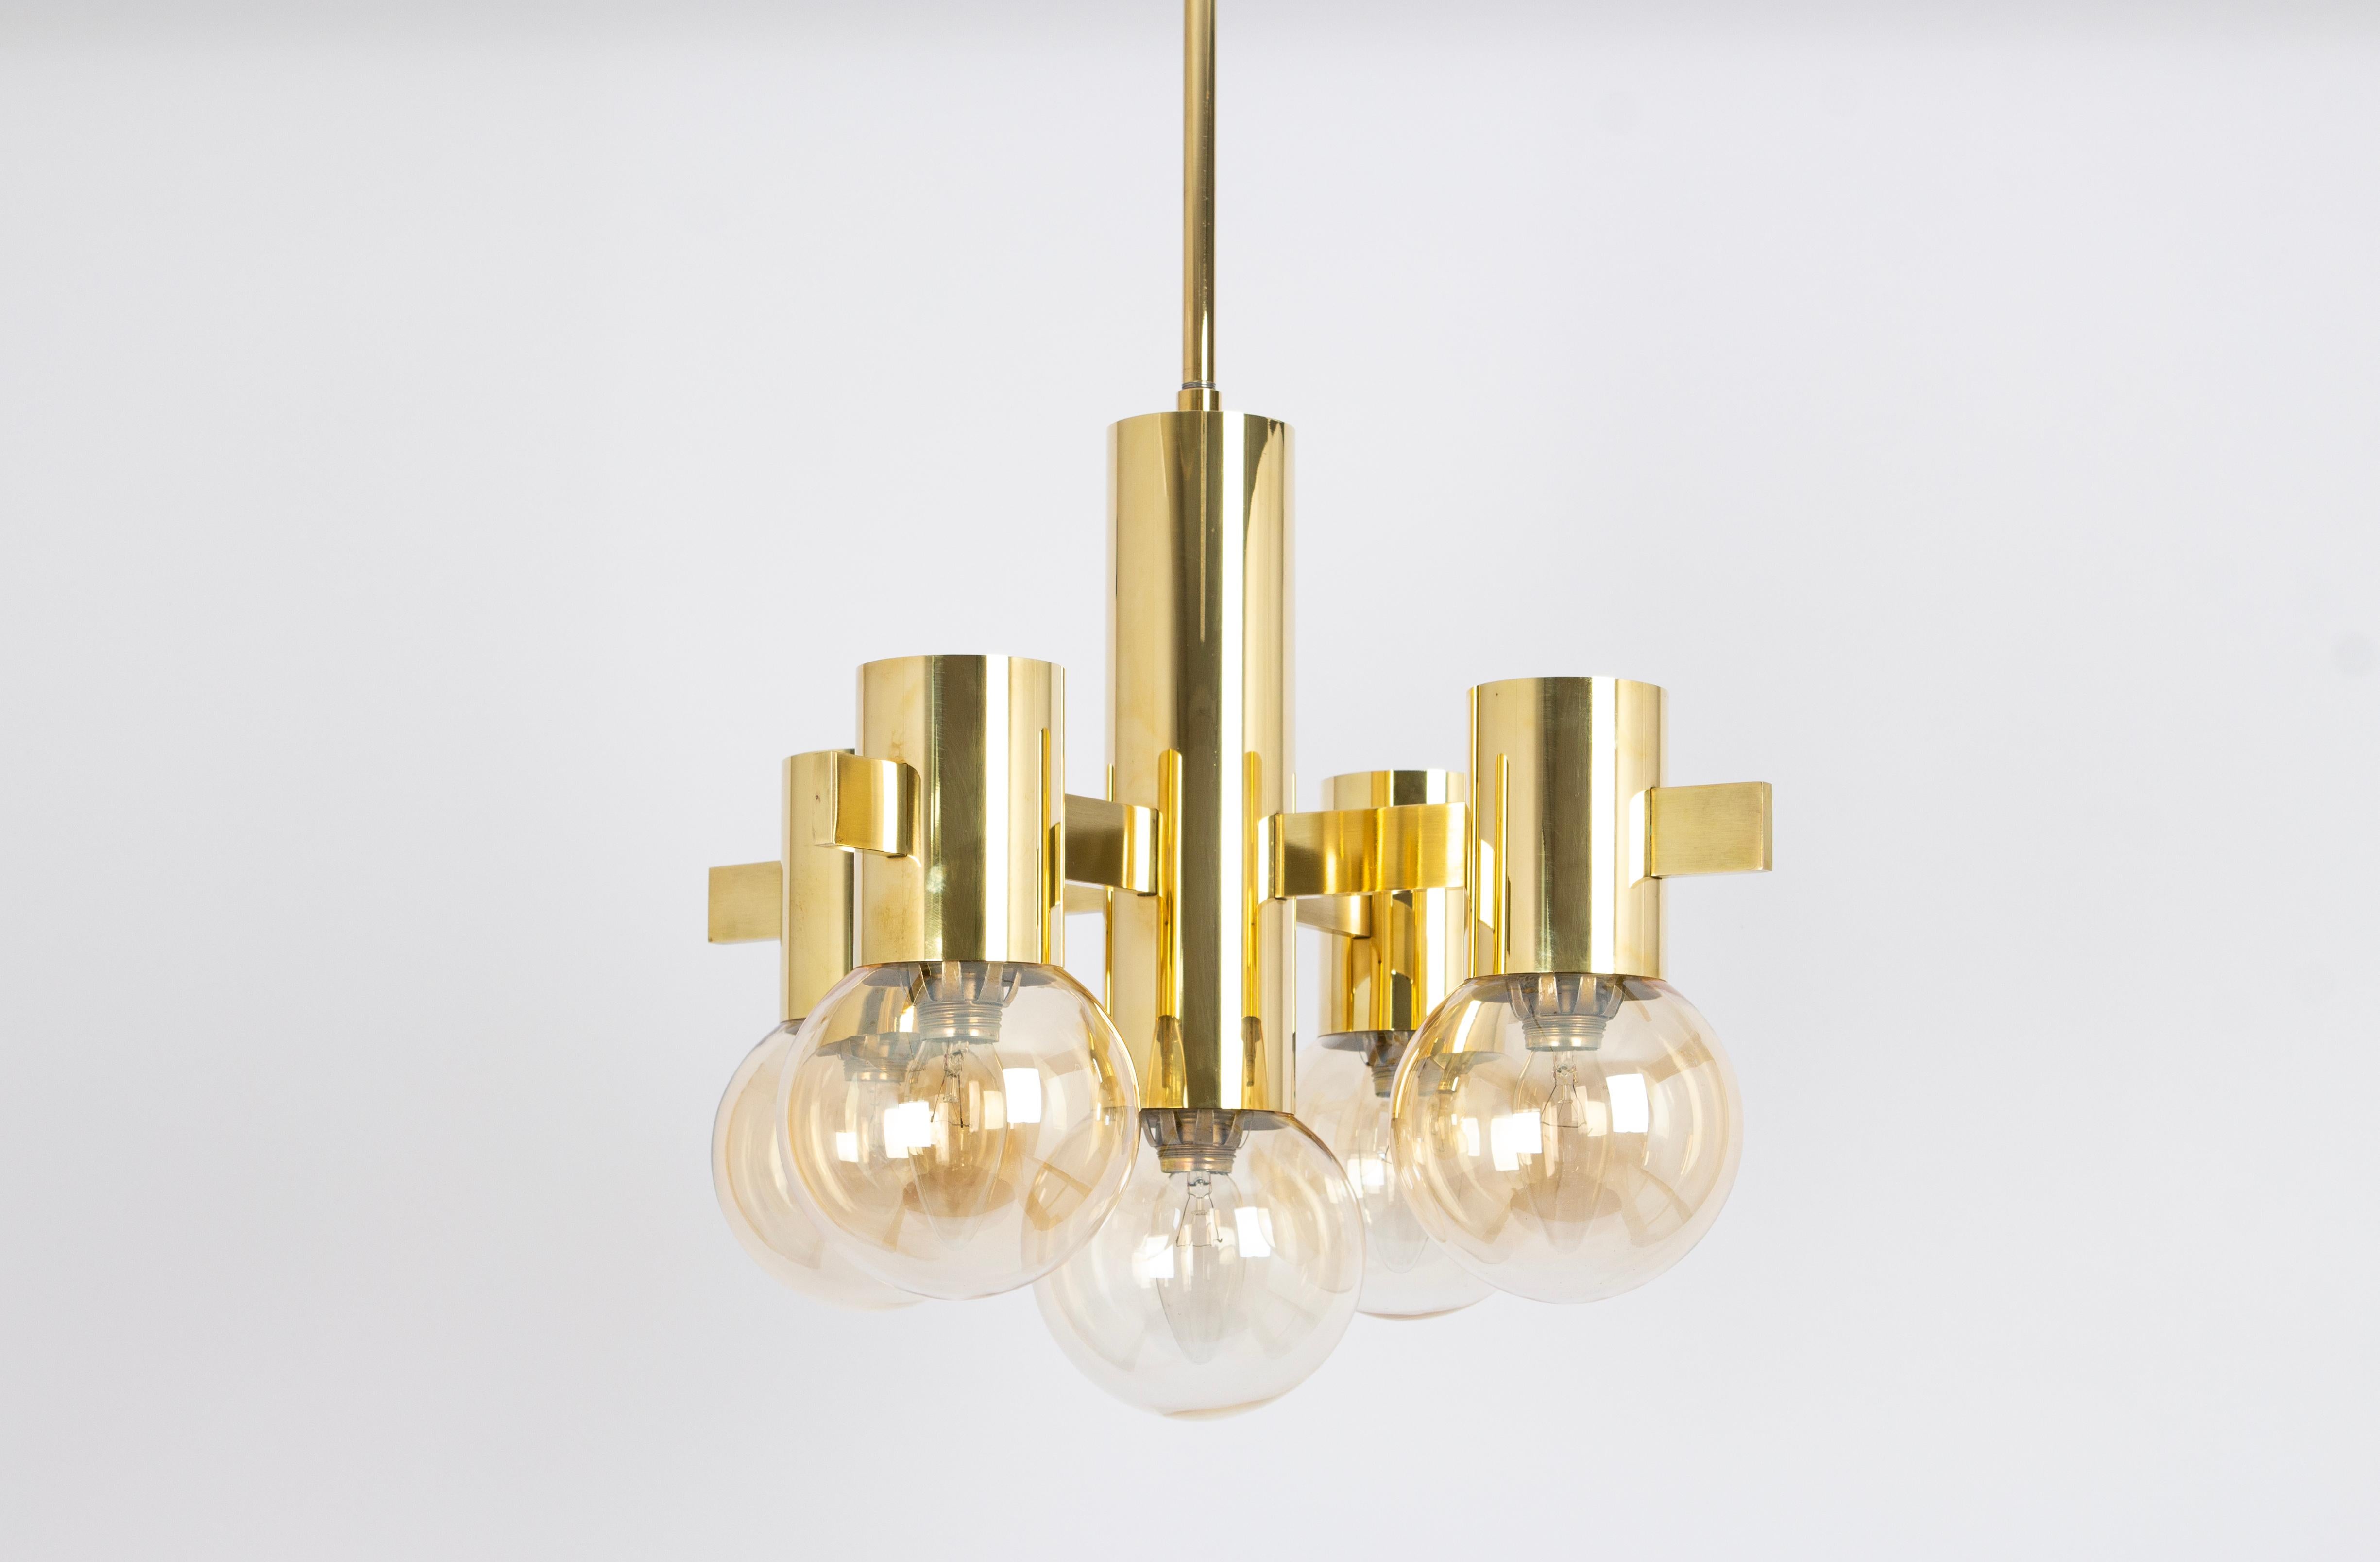 Five-light brass chandelier in the style of Sciolari.
Smoked glass in a very beautiful smokey brown color.
Made with brass, best of the 1970s.

High quality and in very good condition. Cleaned, well-wired and ready to use. 

The fixture requires 5 x